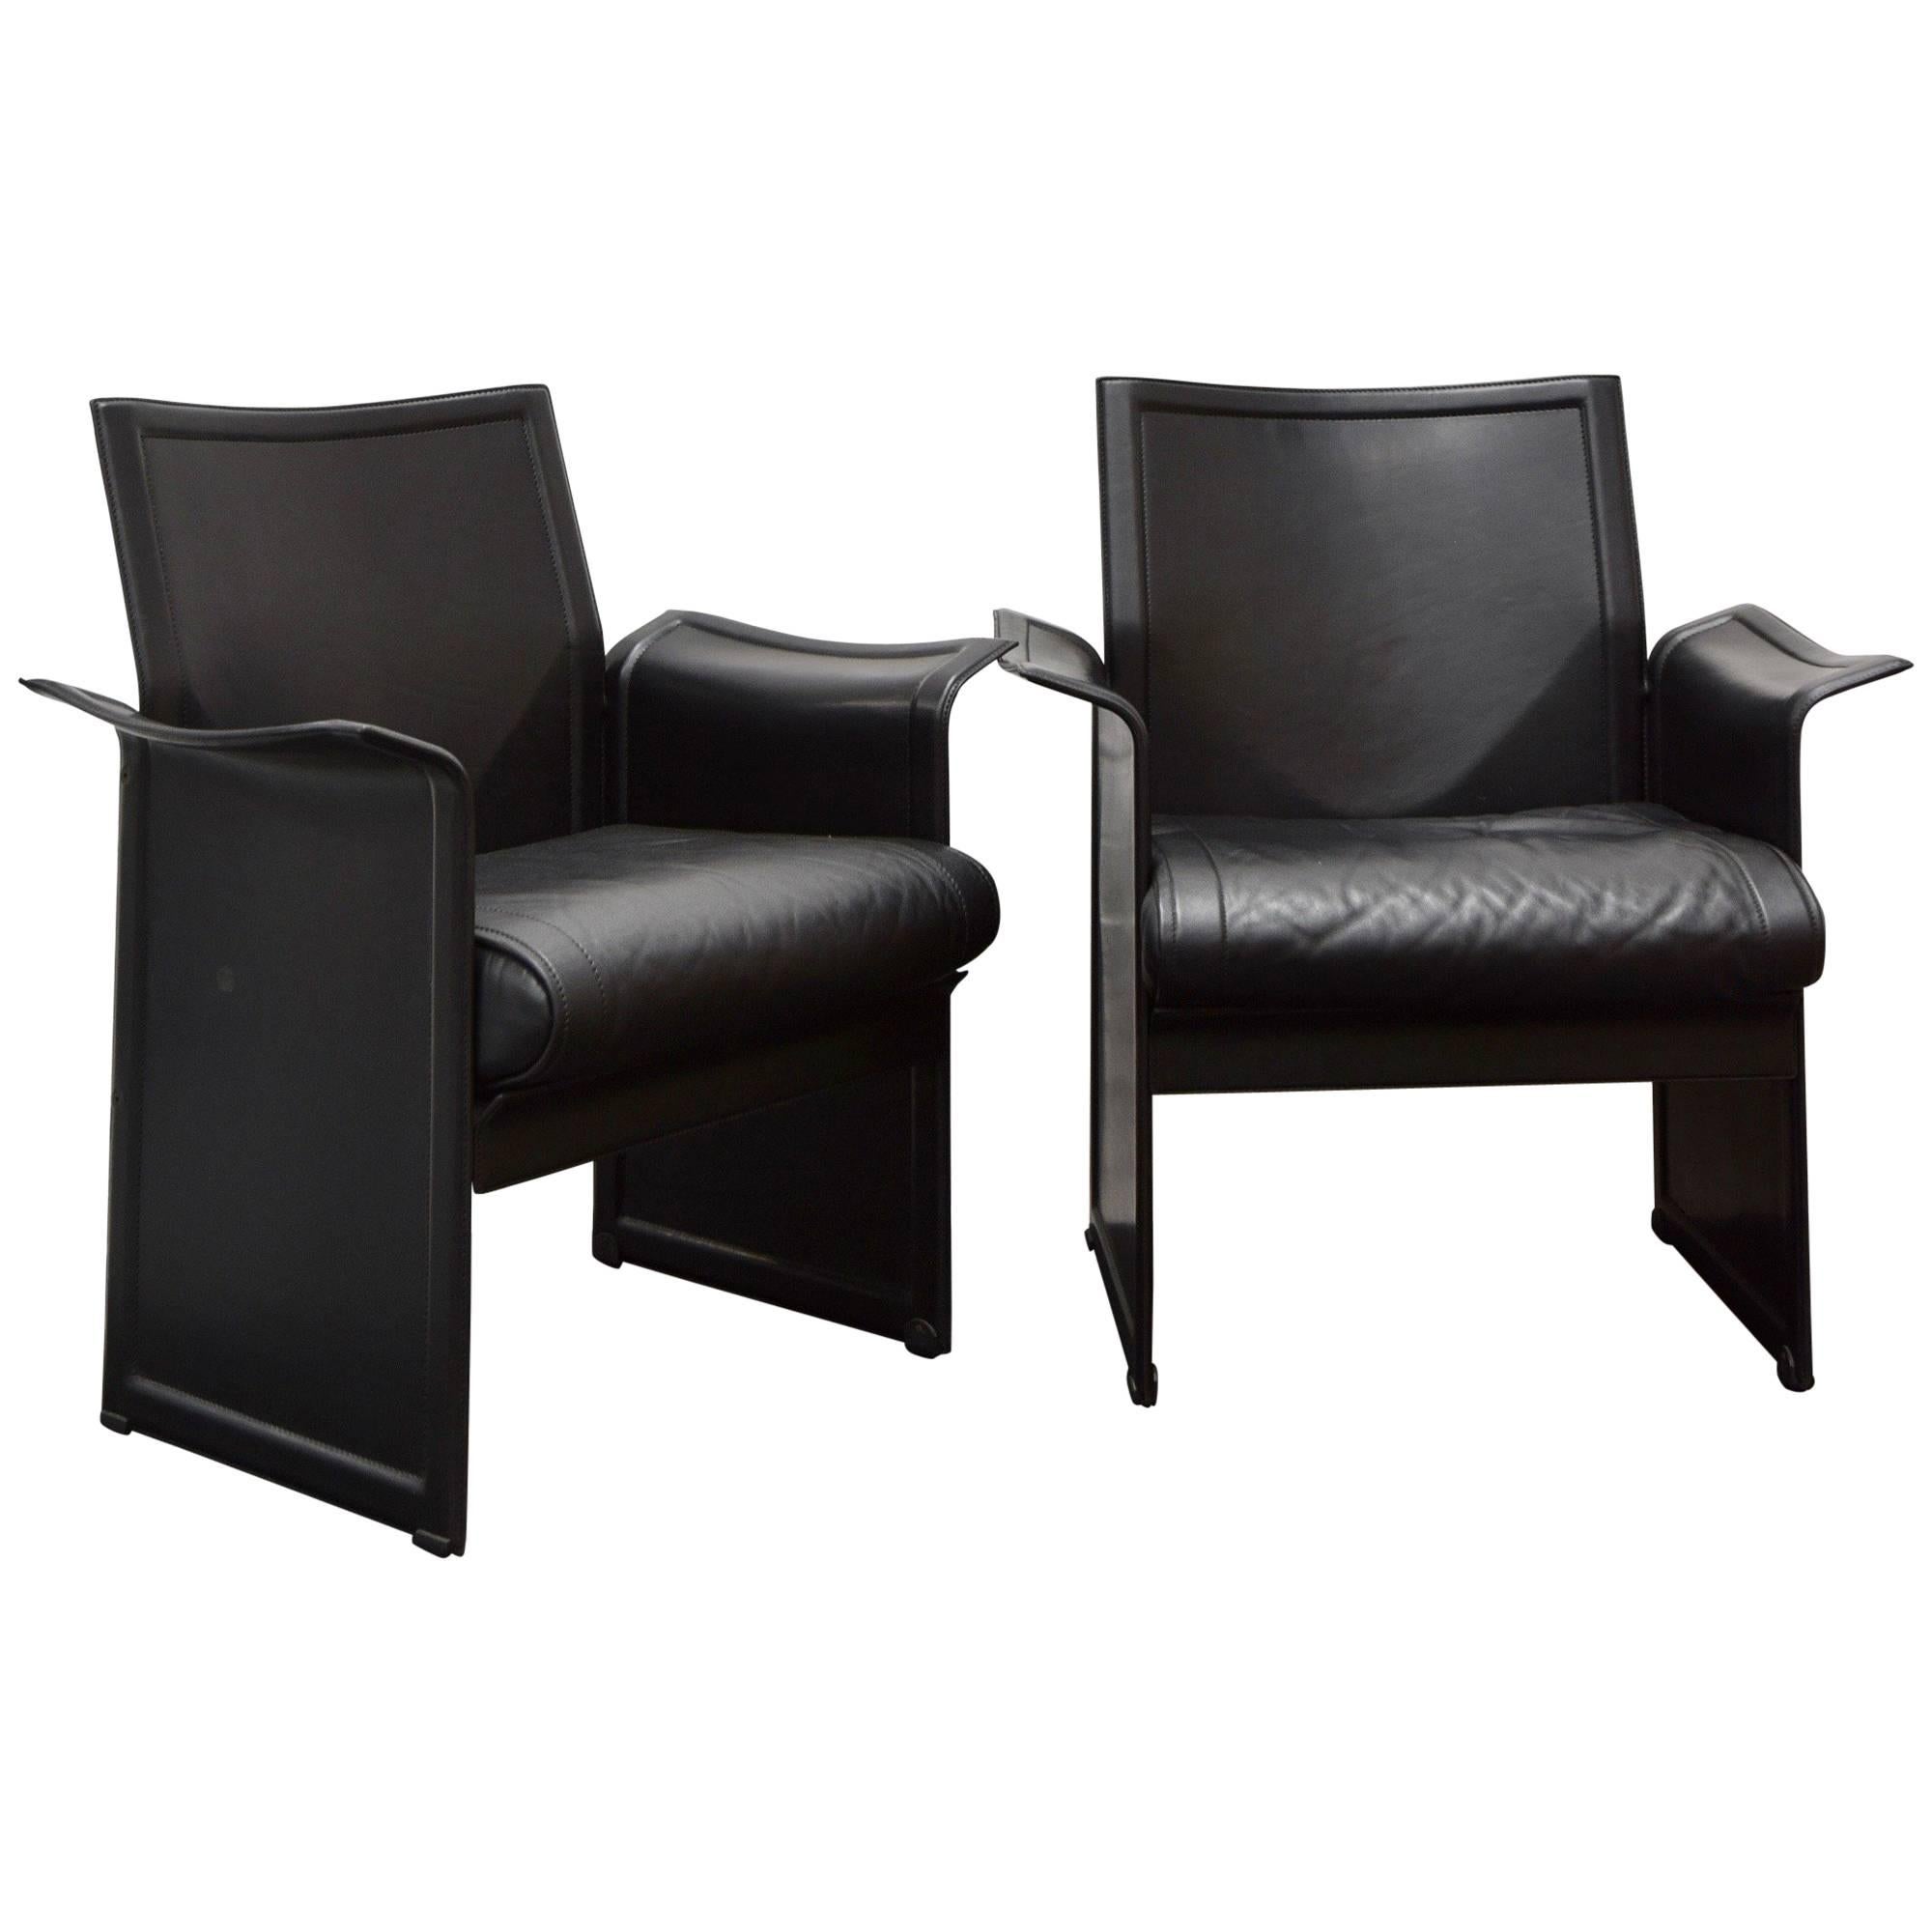 Pair of Vintage Korium Leather Chairs by Tito Agnoli for Matteo Grassi, in Black For Sale